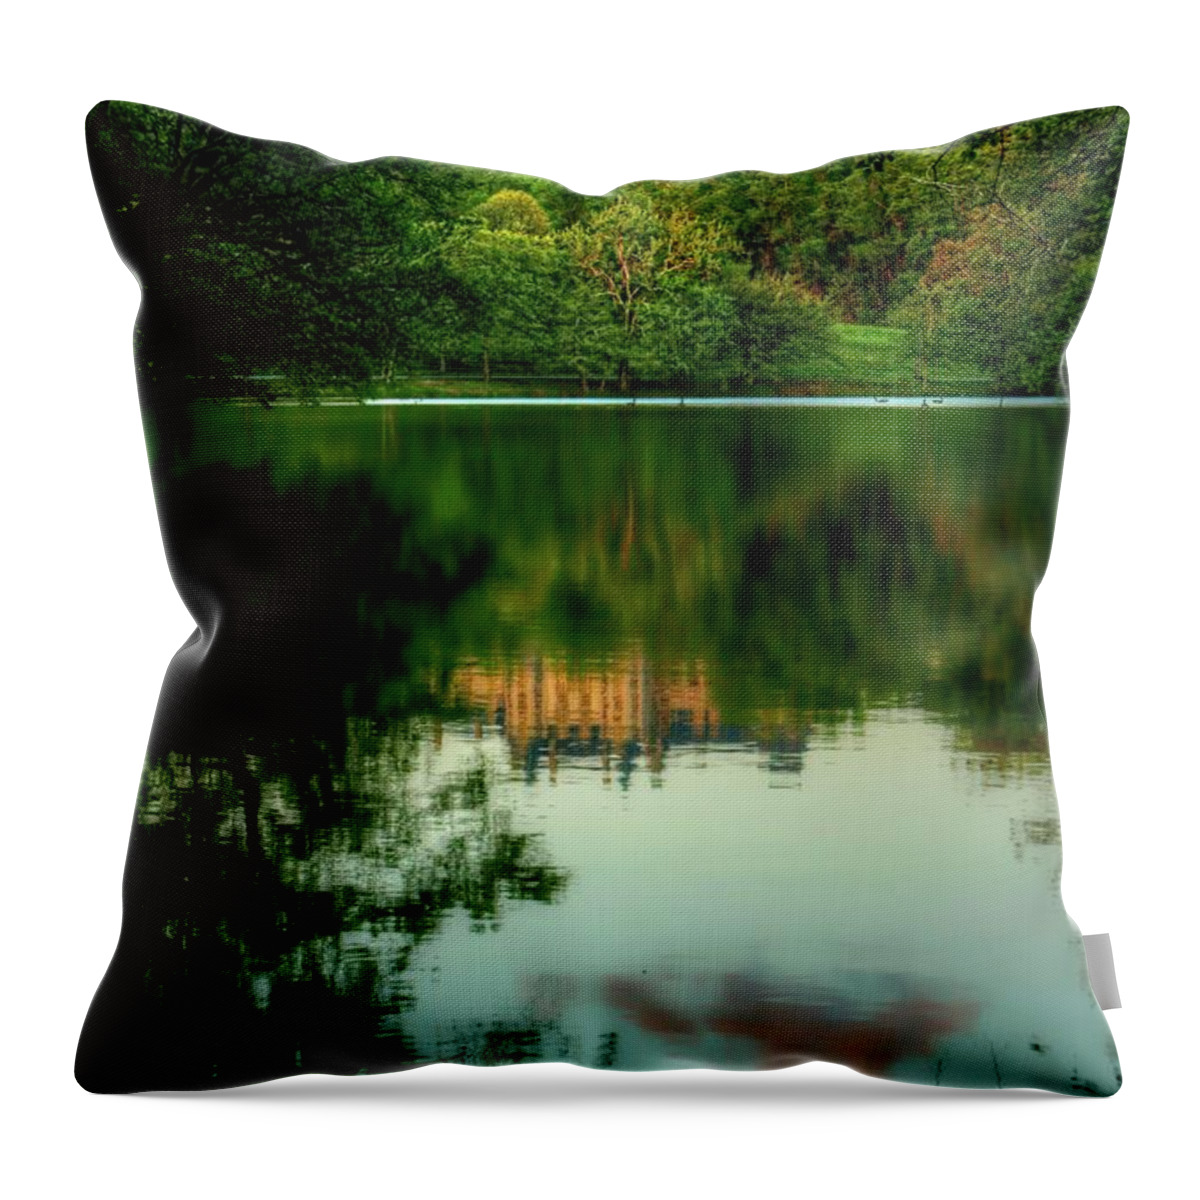 Biltmore Reflection Throw Pillow featuring the photograph Biltmore Reflection by Carol Montoya